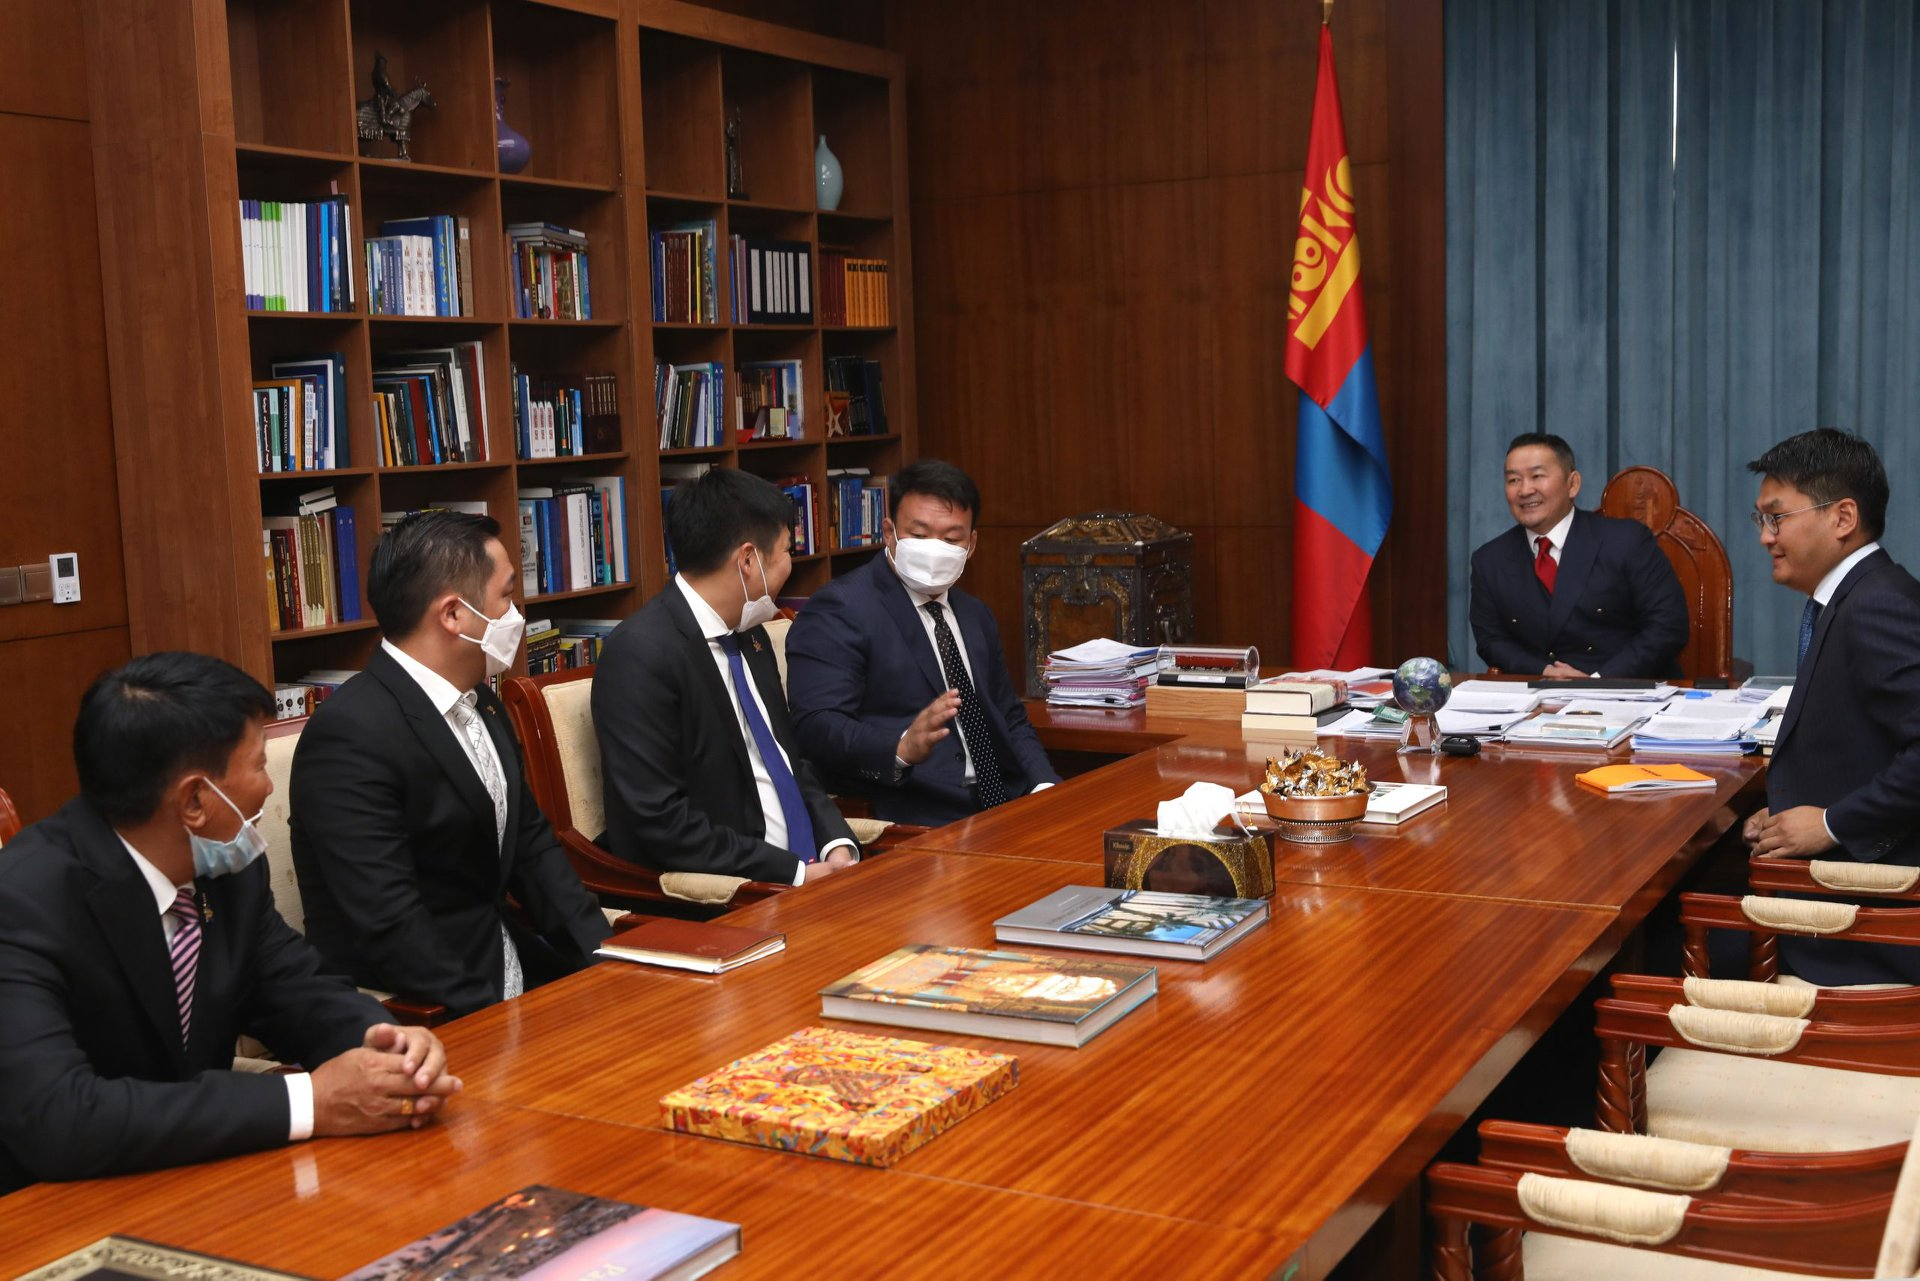 Mongolia NOC President meets head of state to discuss Olympic preparations